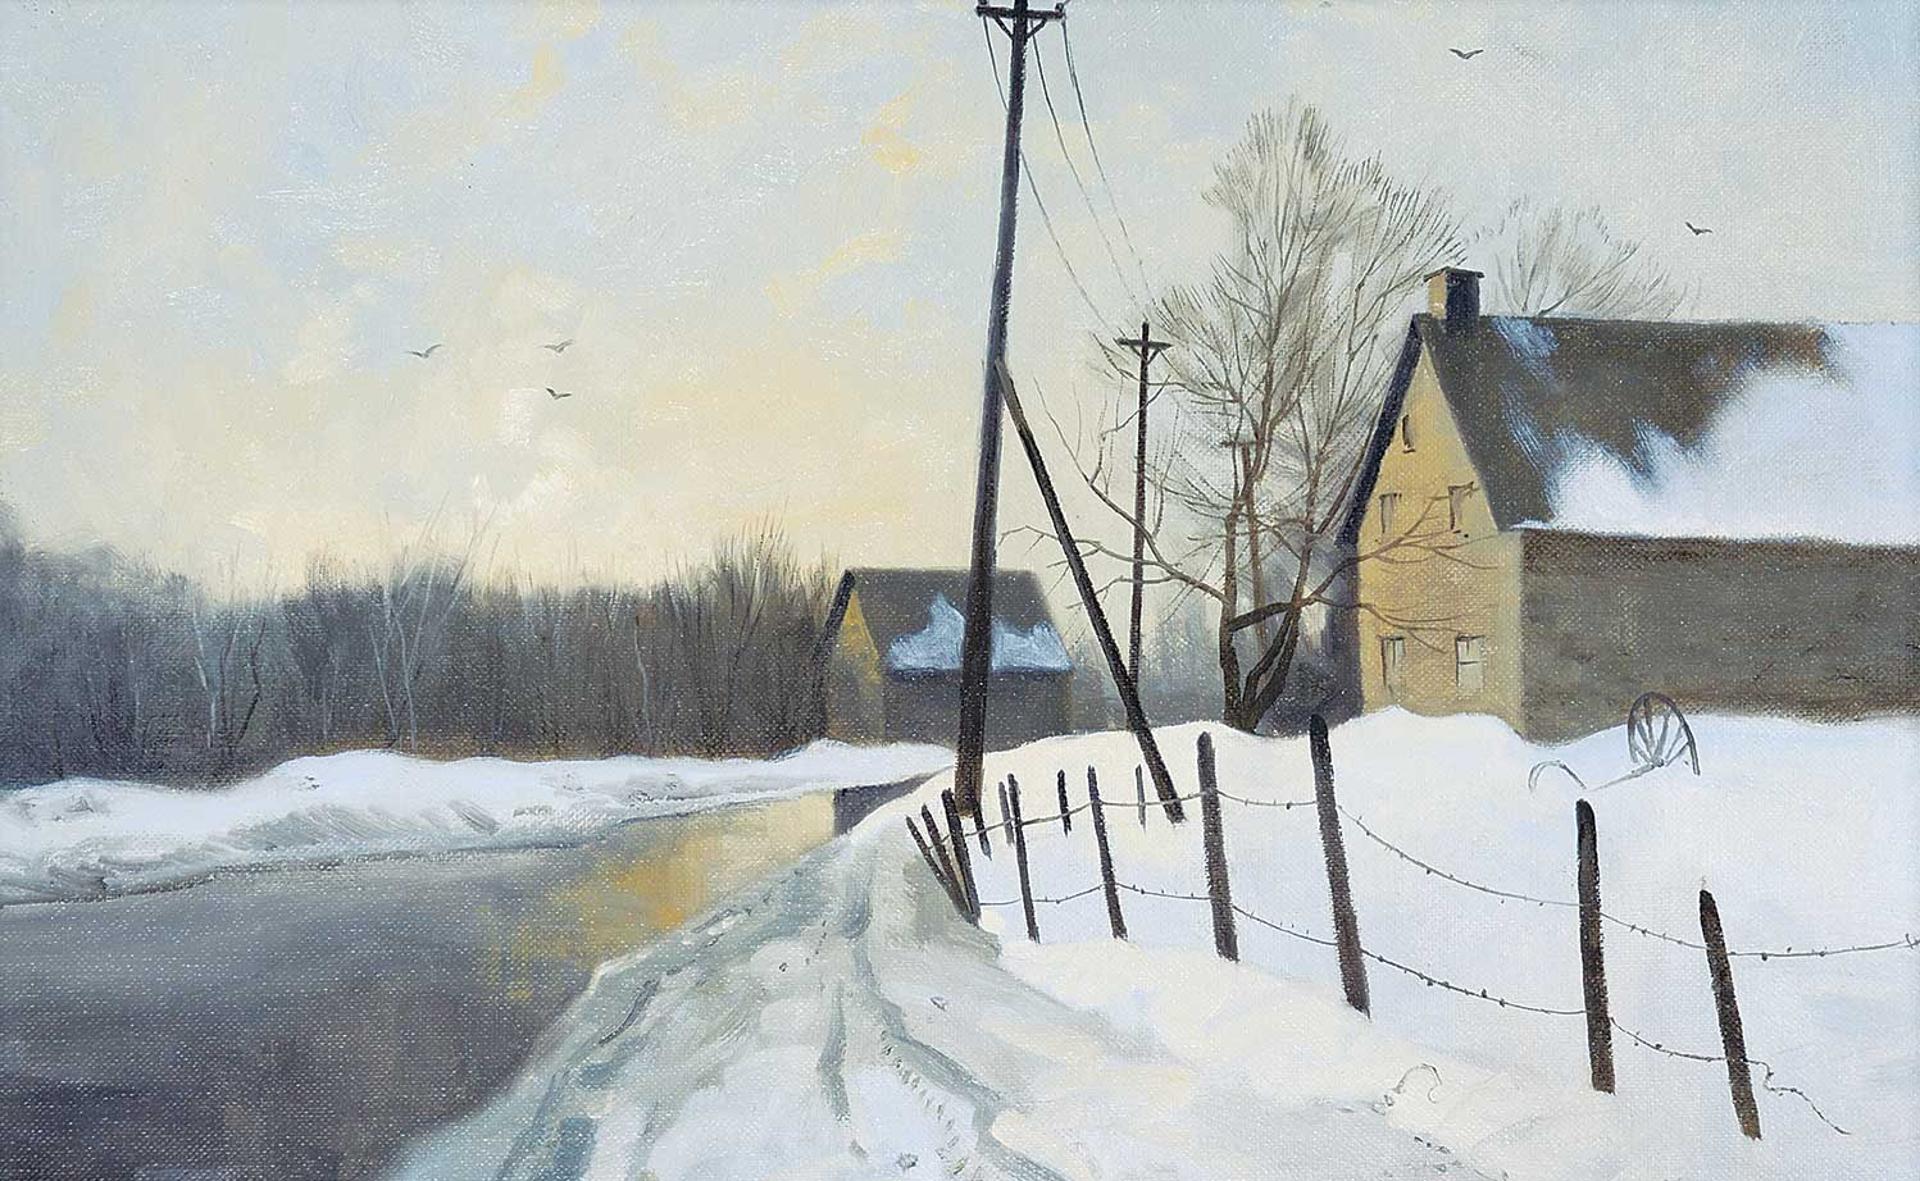 Alexis Arts (1940) - Untitled - Winter Country Road